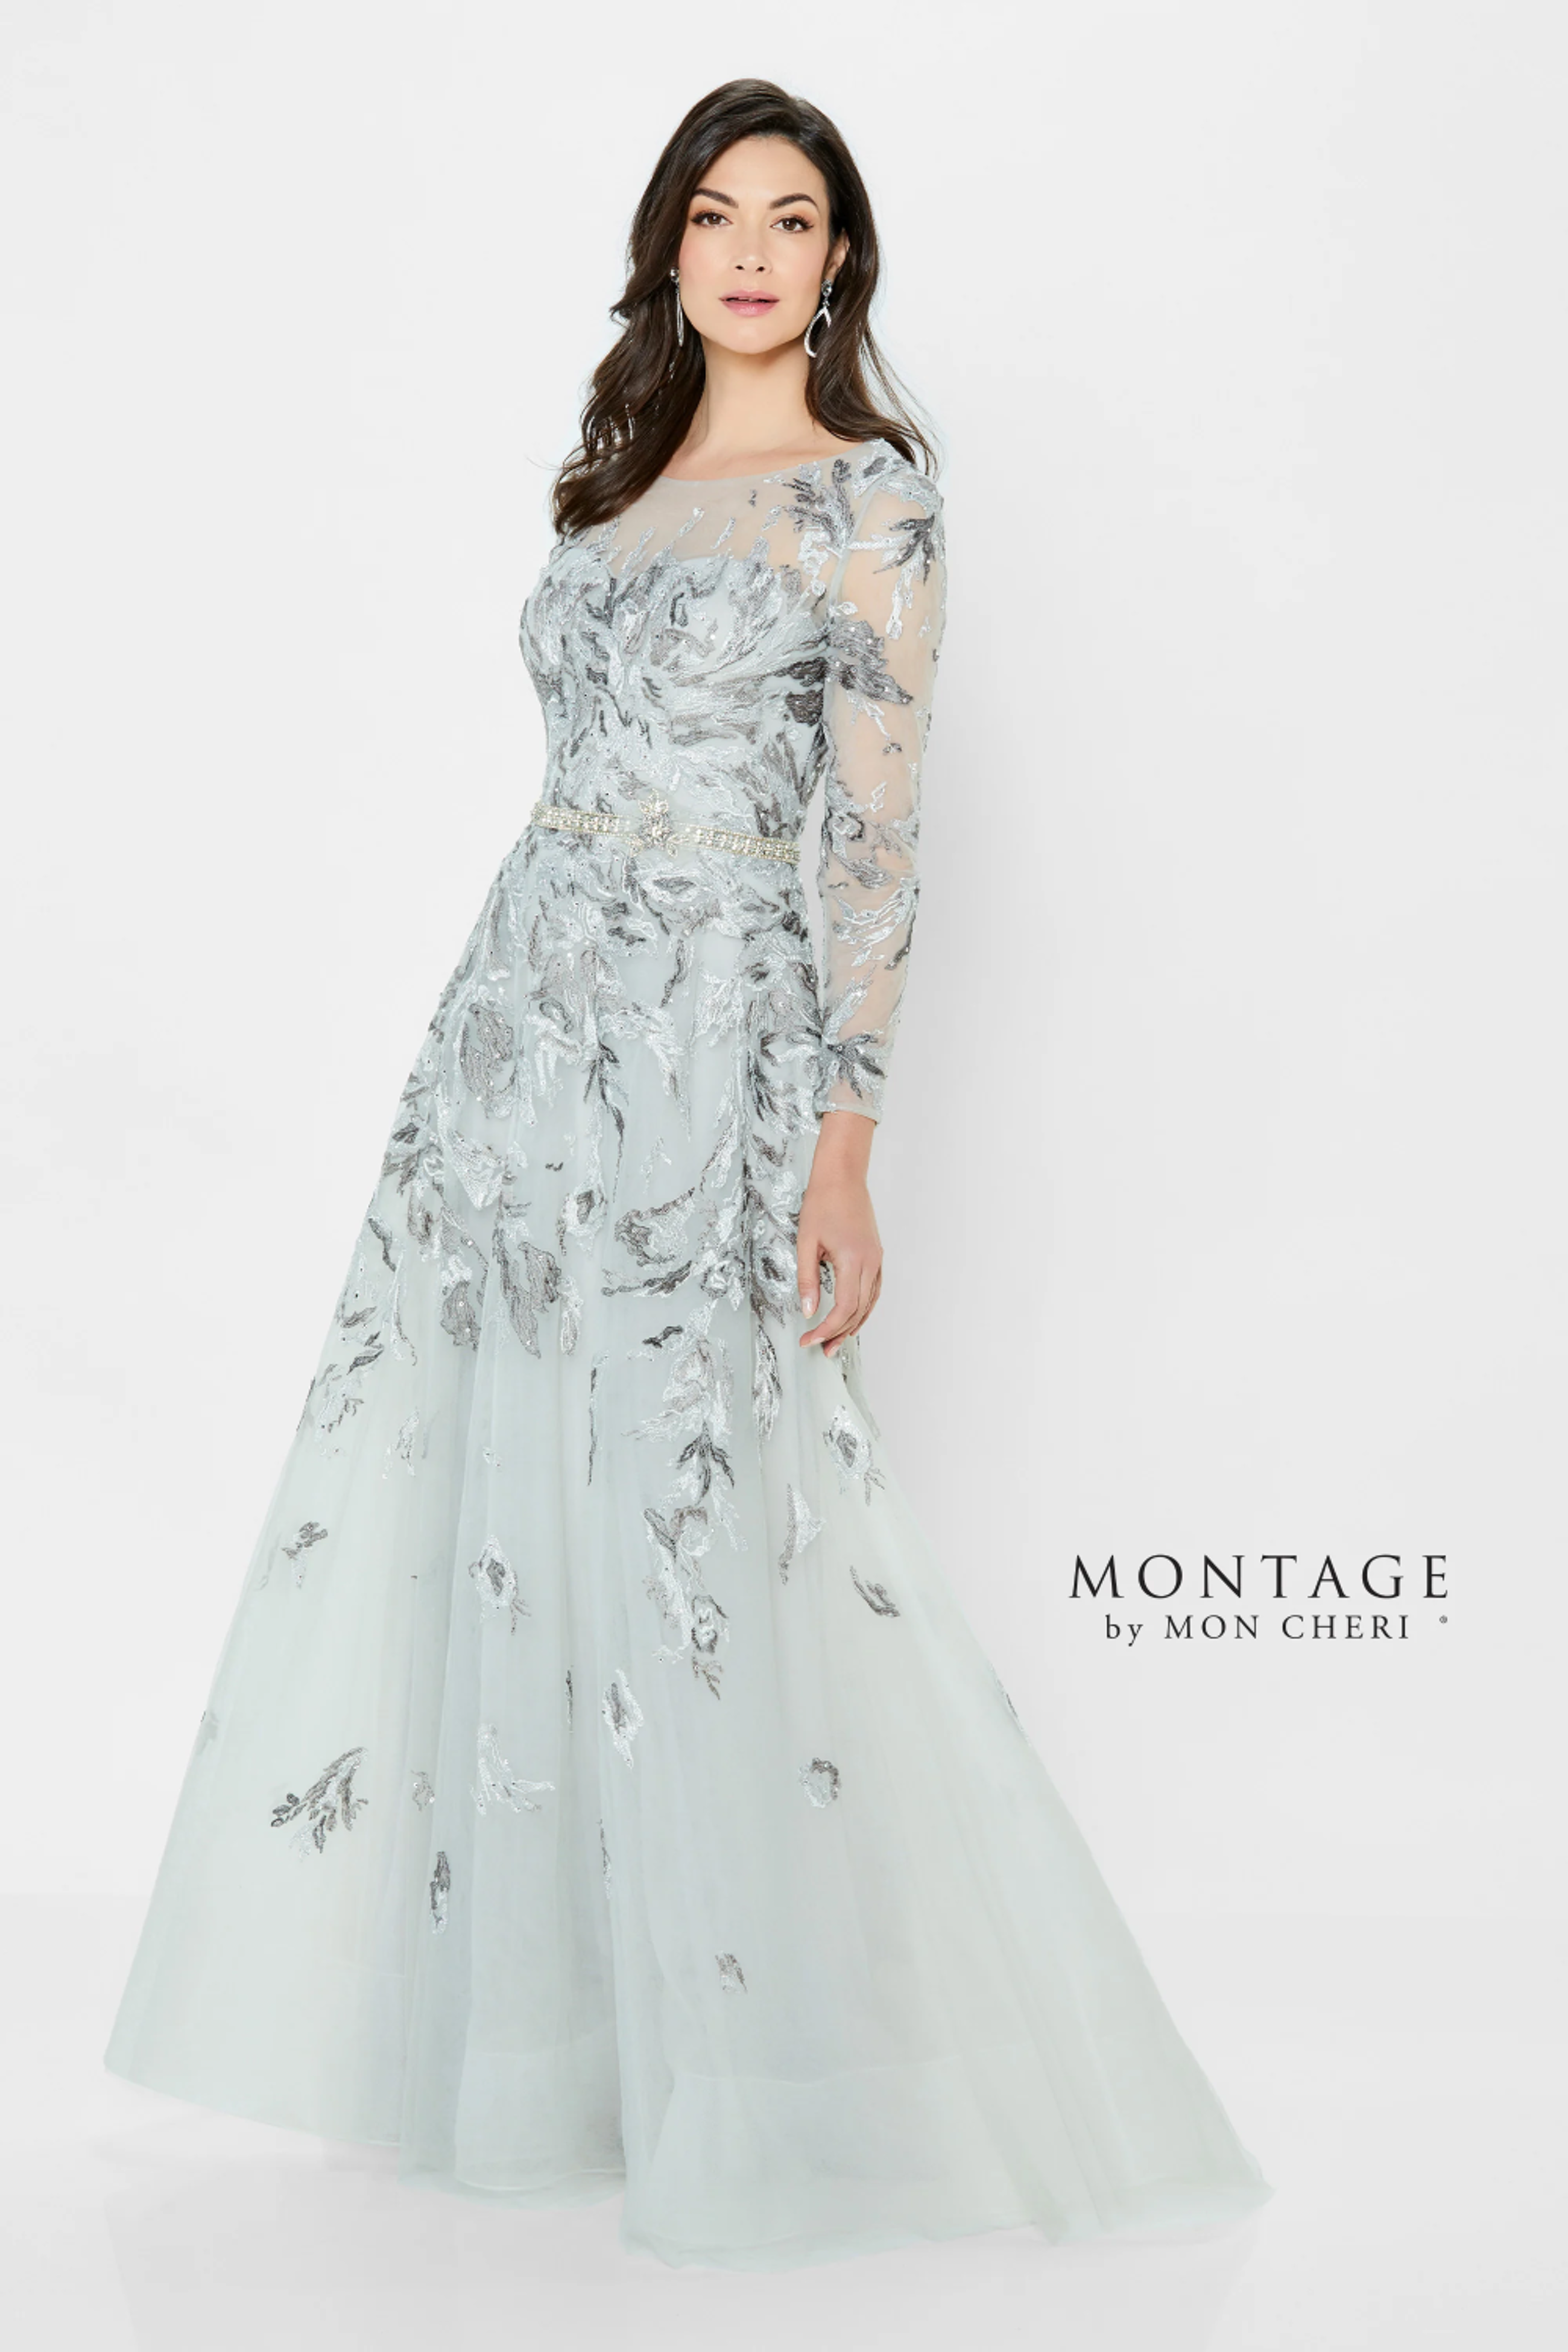 Trending for Mother of the Bride Dresses Image